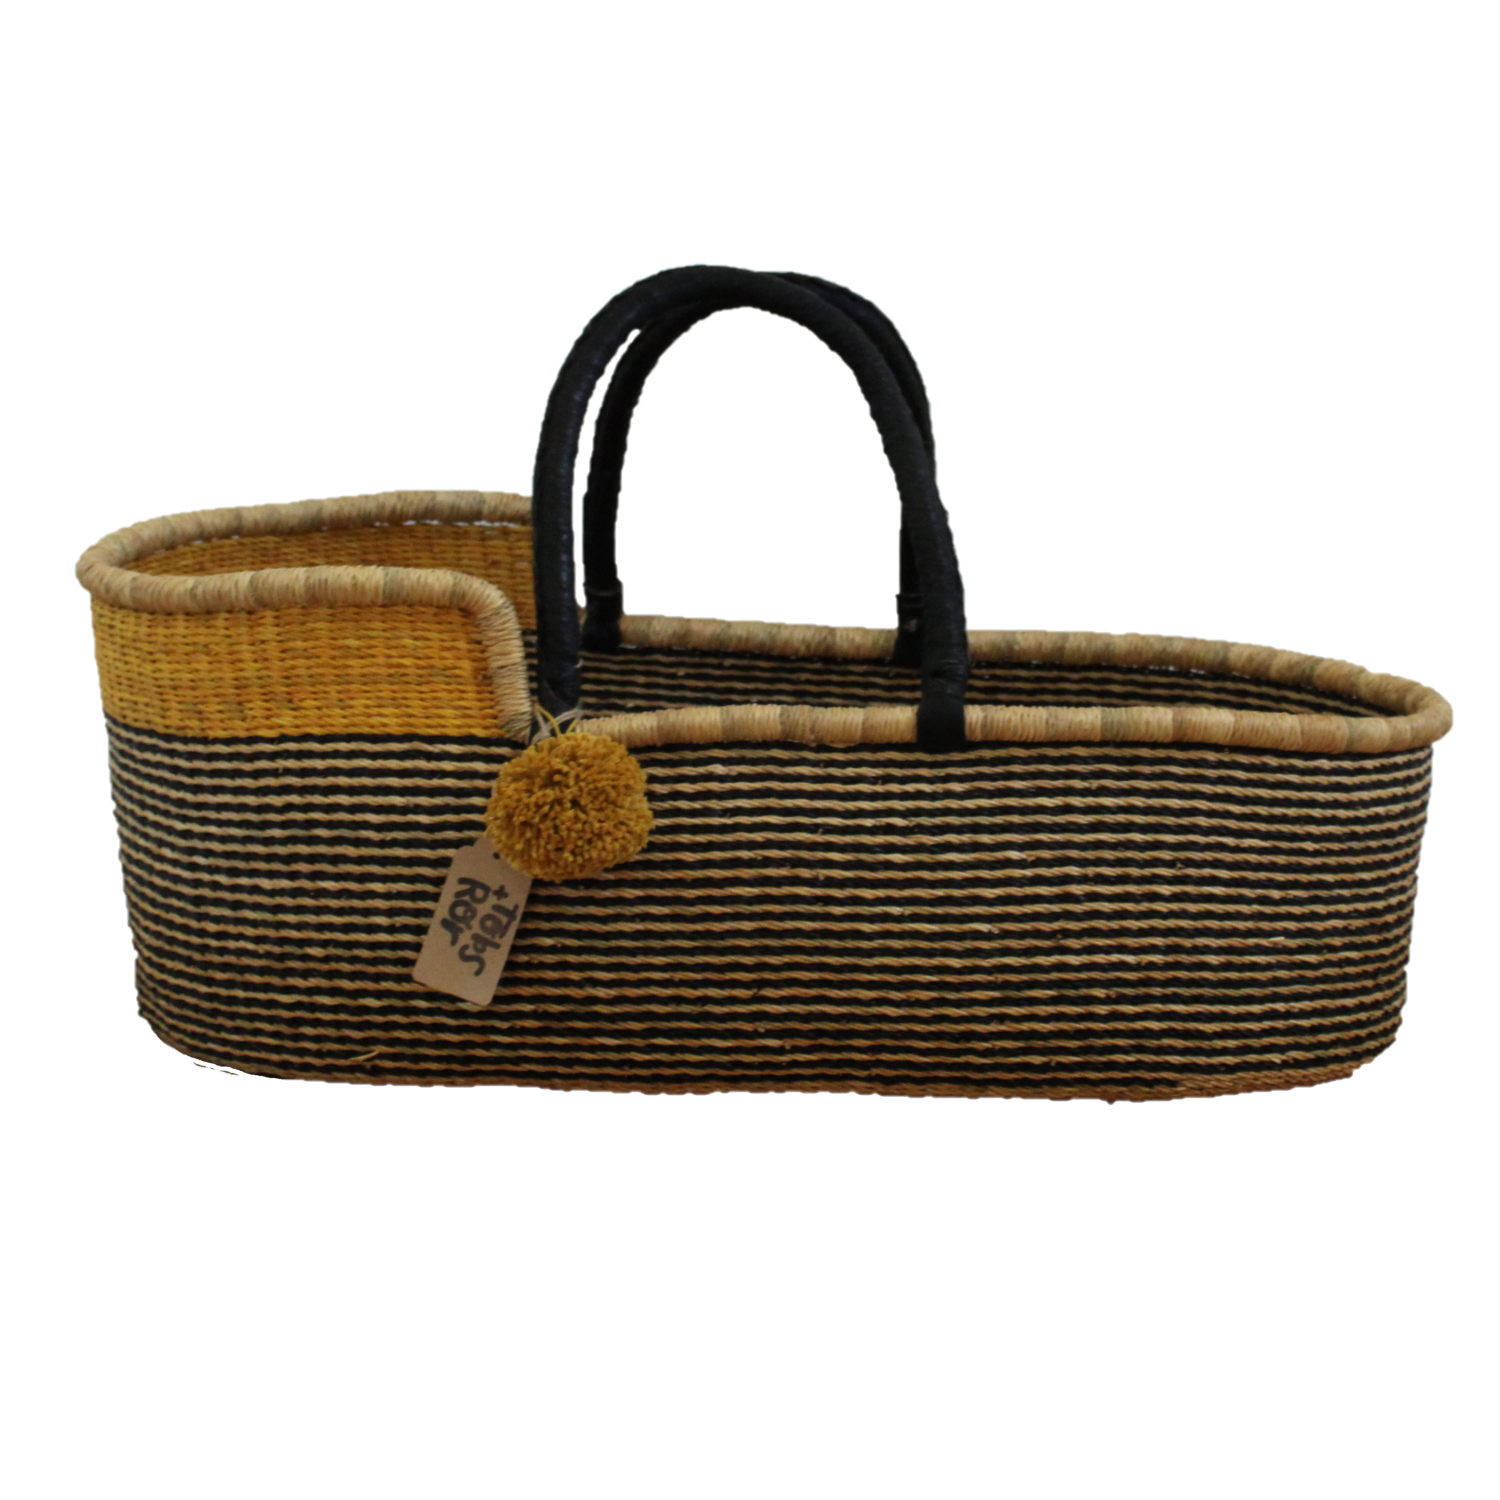 Simba handwoven moses basket with leather handles including mattress and liner by the little rattan company